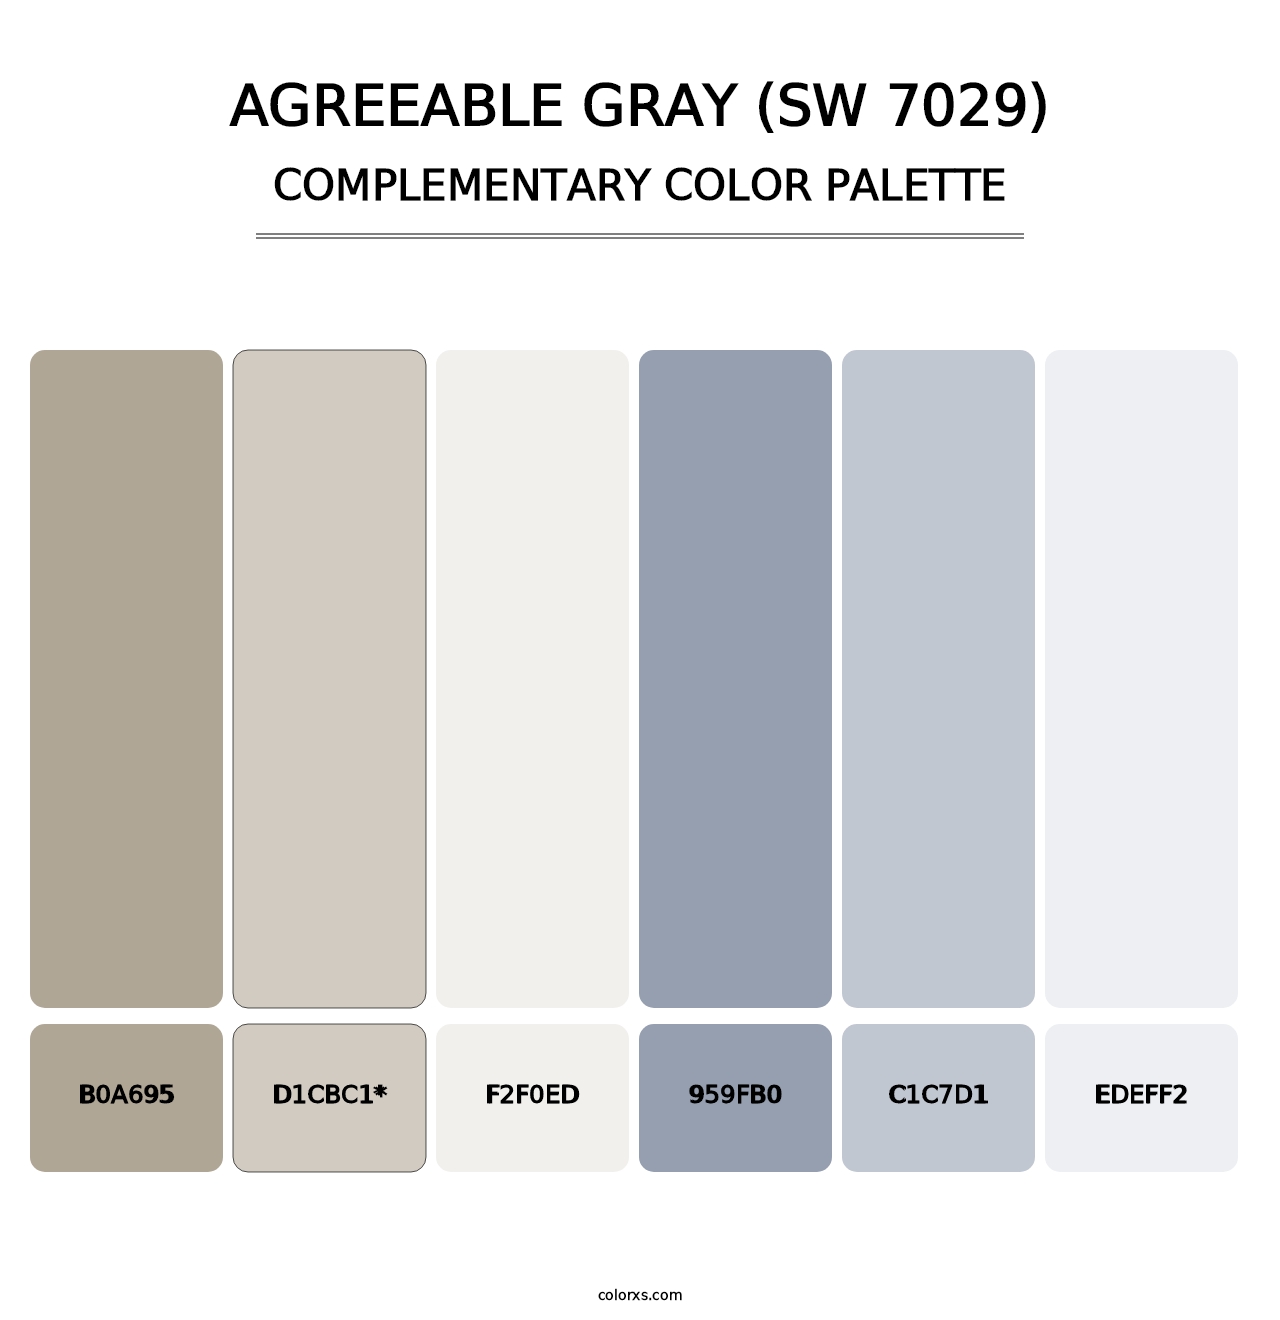 Agreeable Gray (SW 7029) - Complementary Color Palette